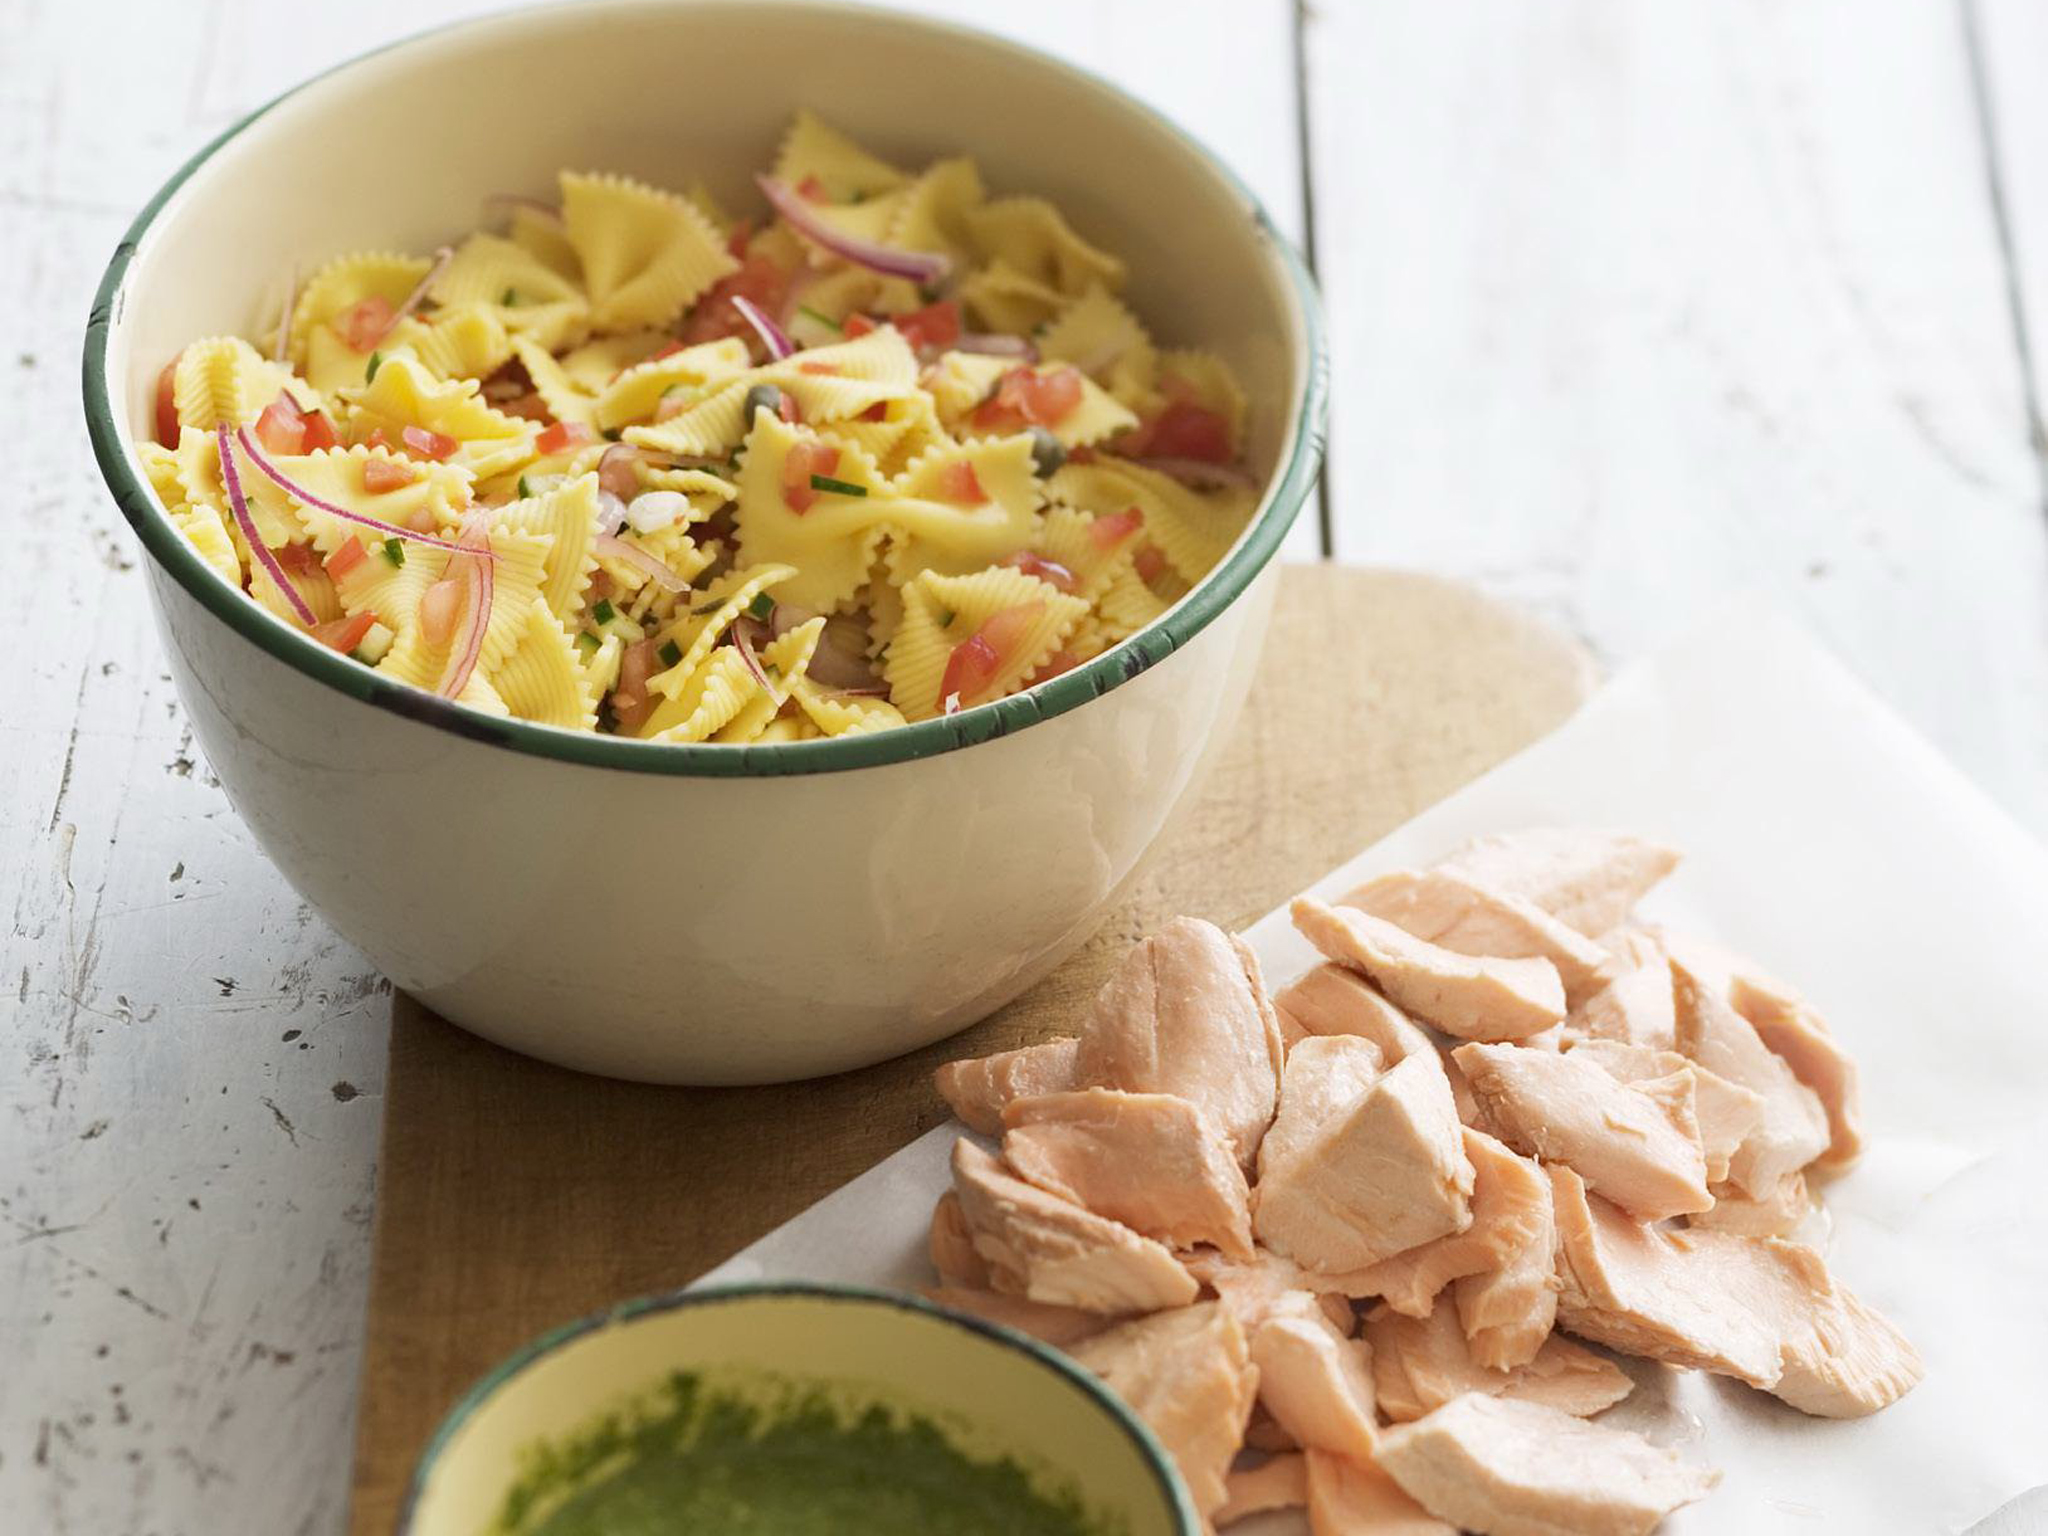 Poached salmon and pasta salad with rocket pesto